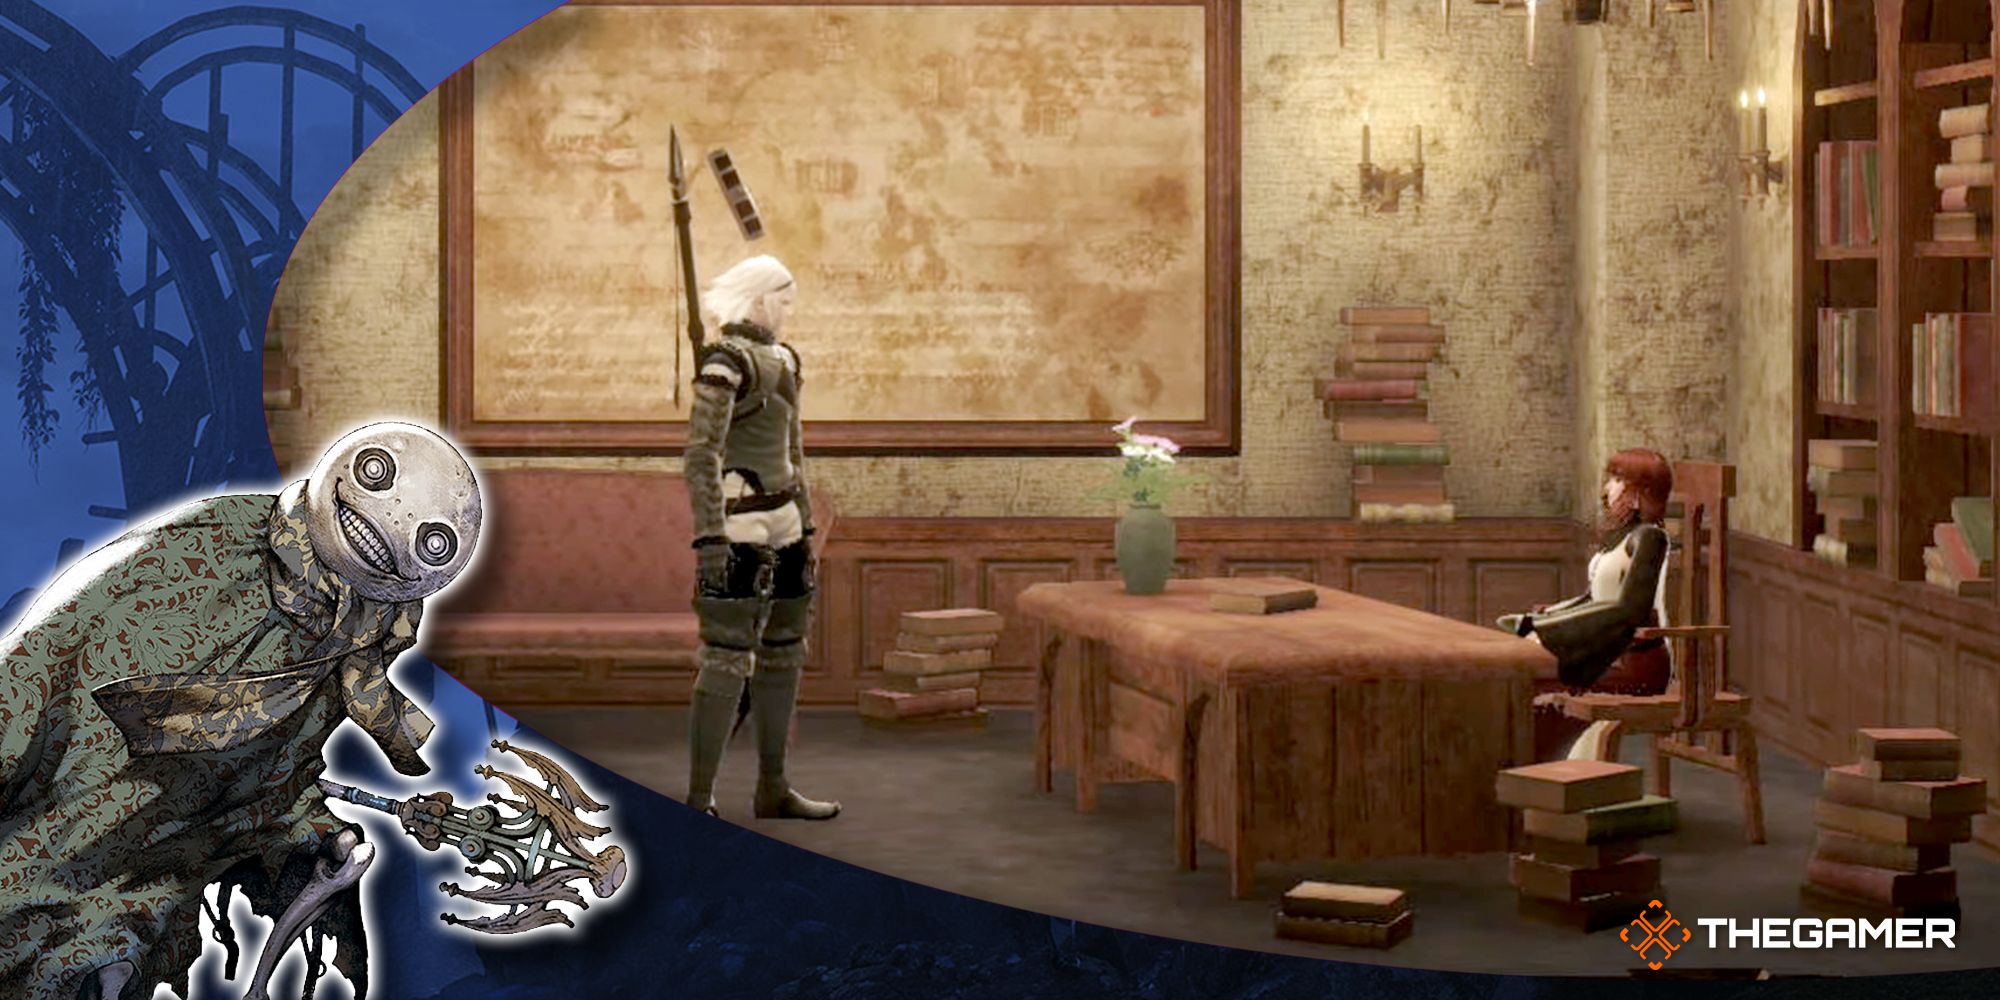 Art and screenshot from Nier Replicant.